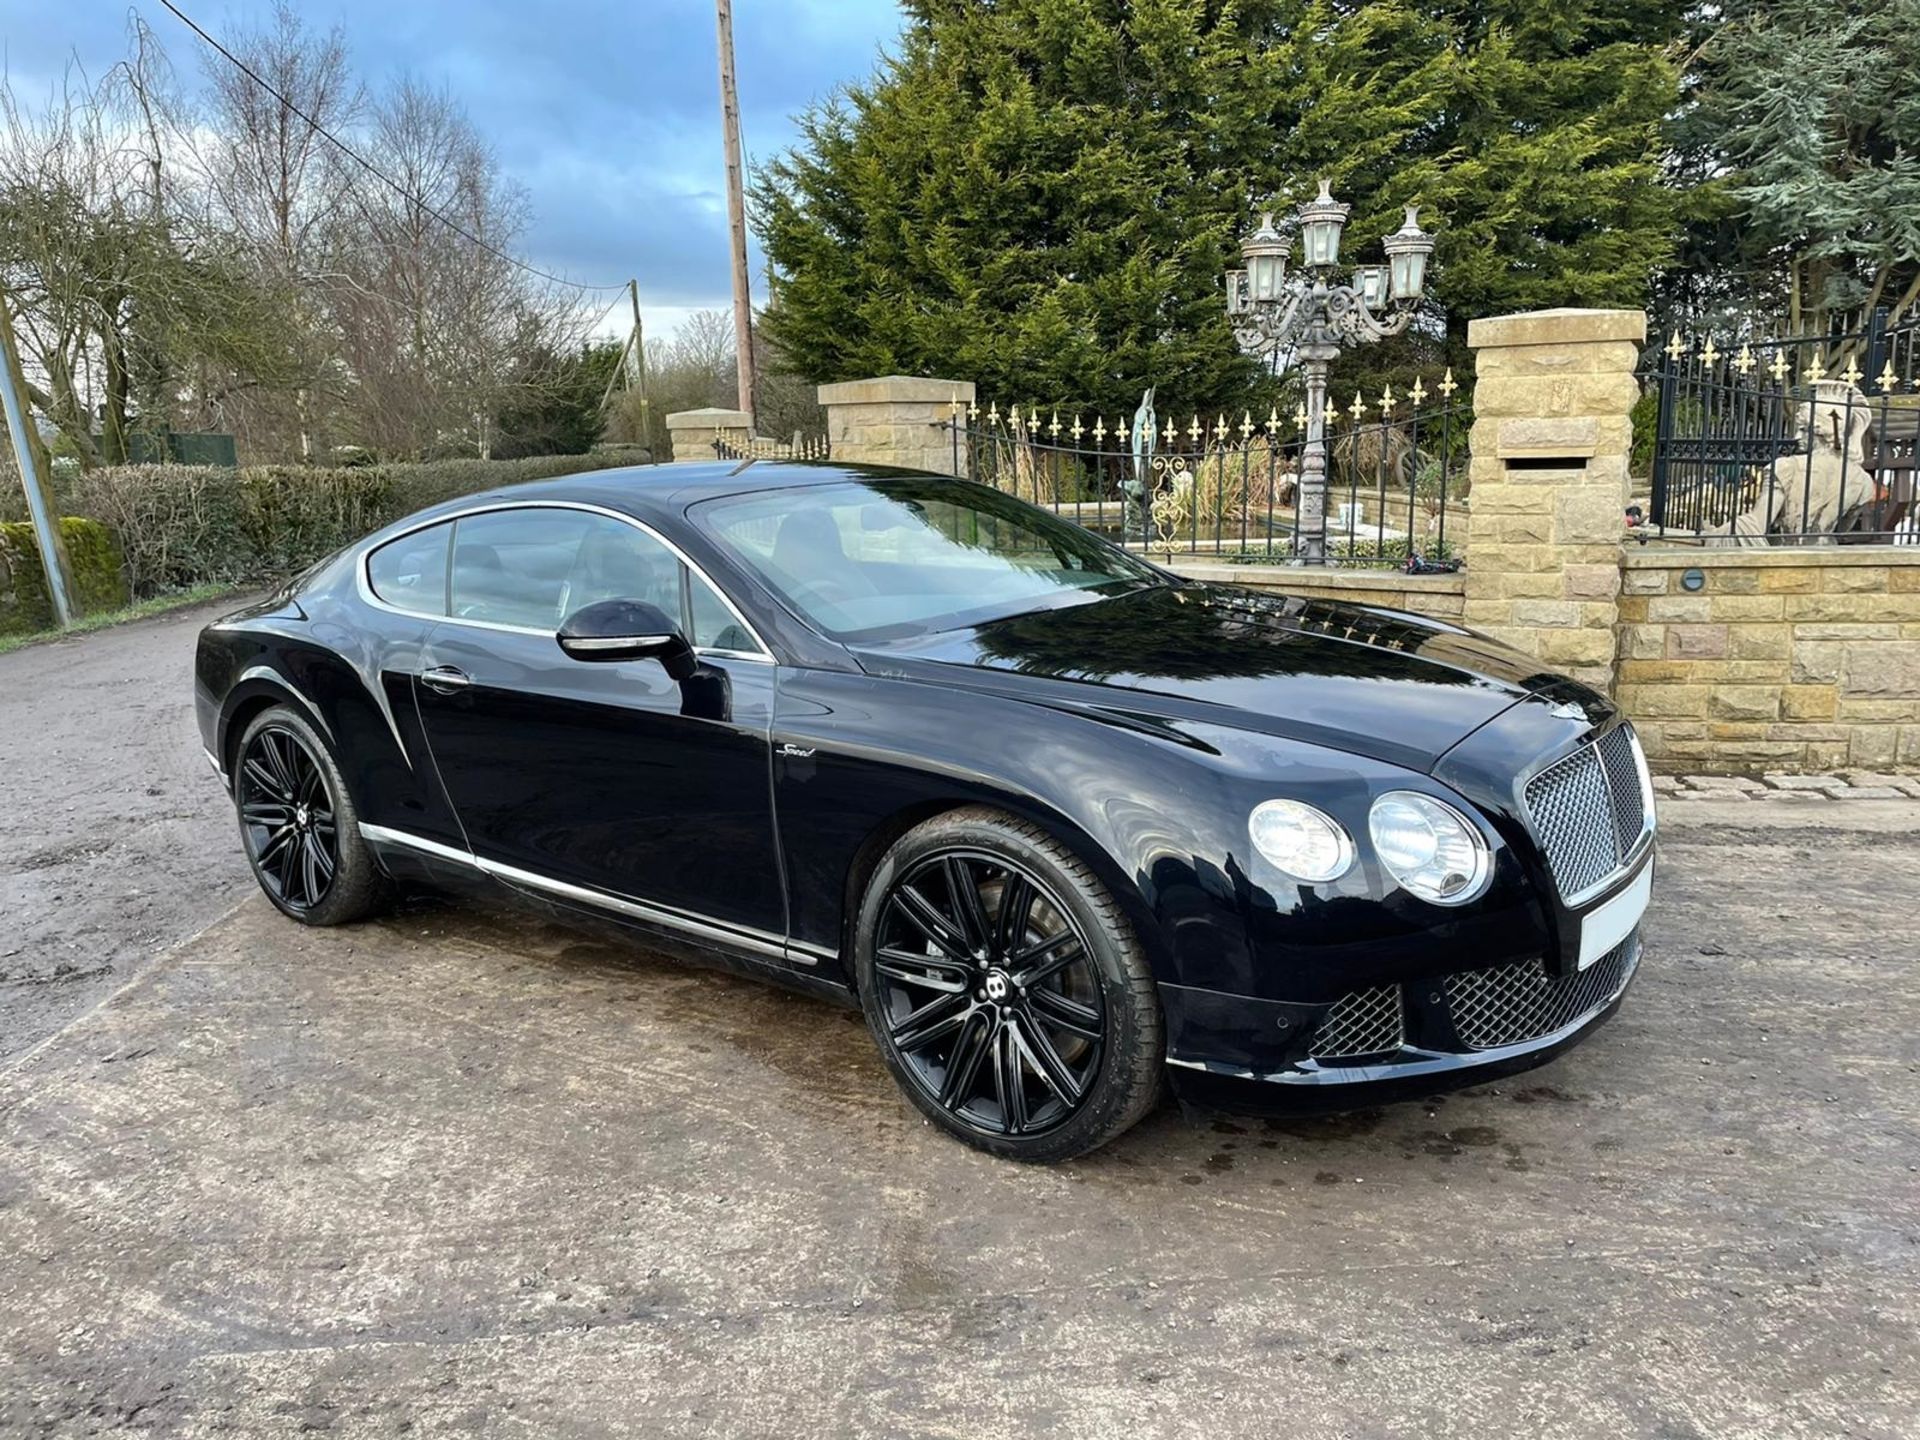 2014/14 REG BENTLEY CONTINENTAL GT SPEED 6.0 AUTO BLACK COUPE 626 HP- FULL BENTLEY SERVICE HISTORY